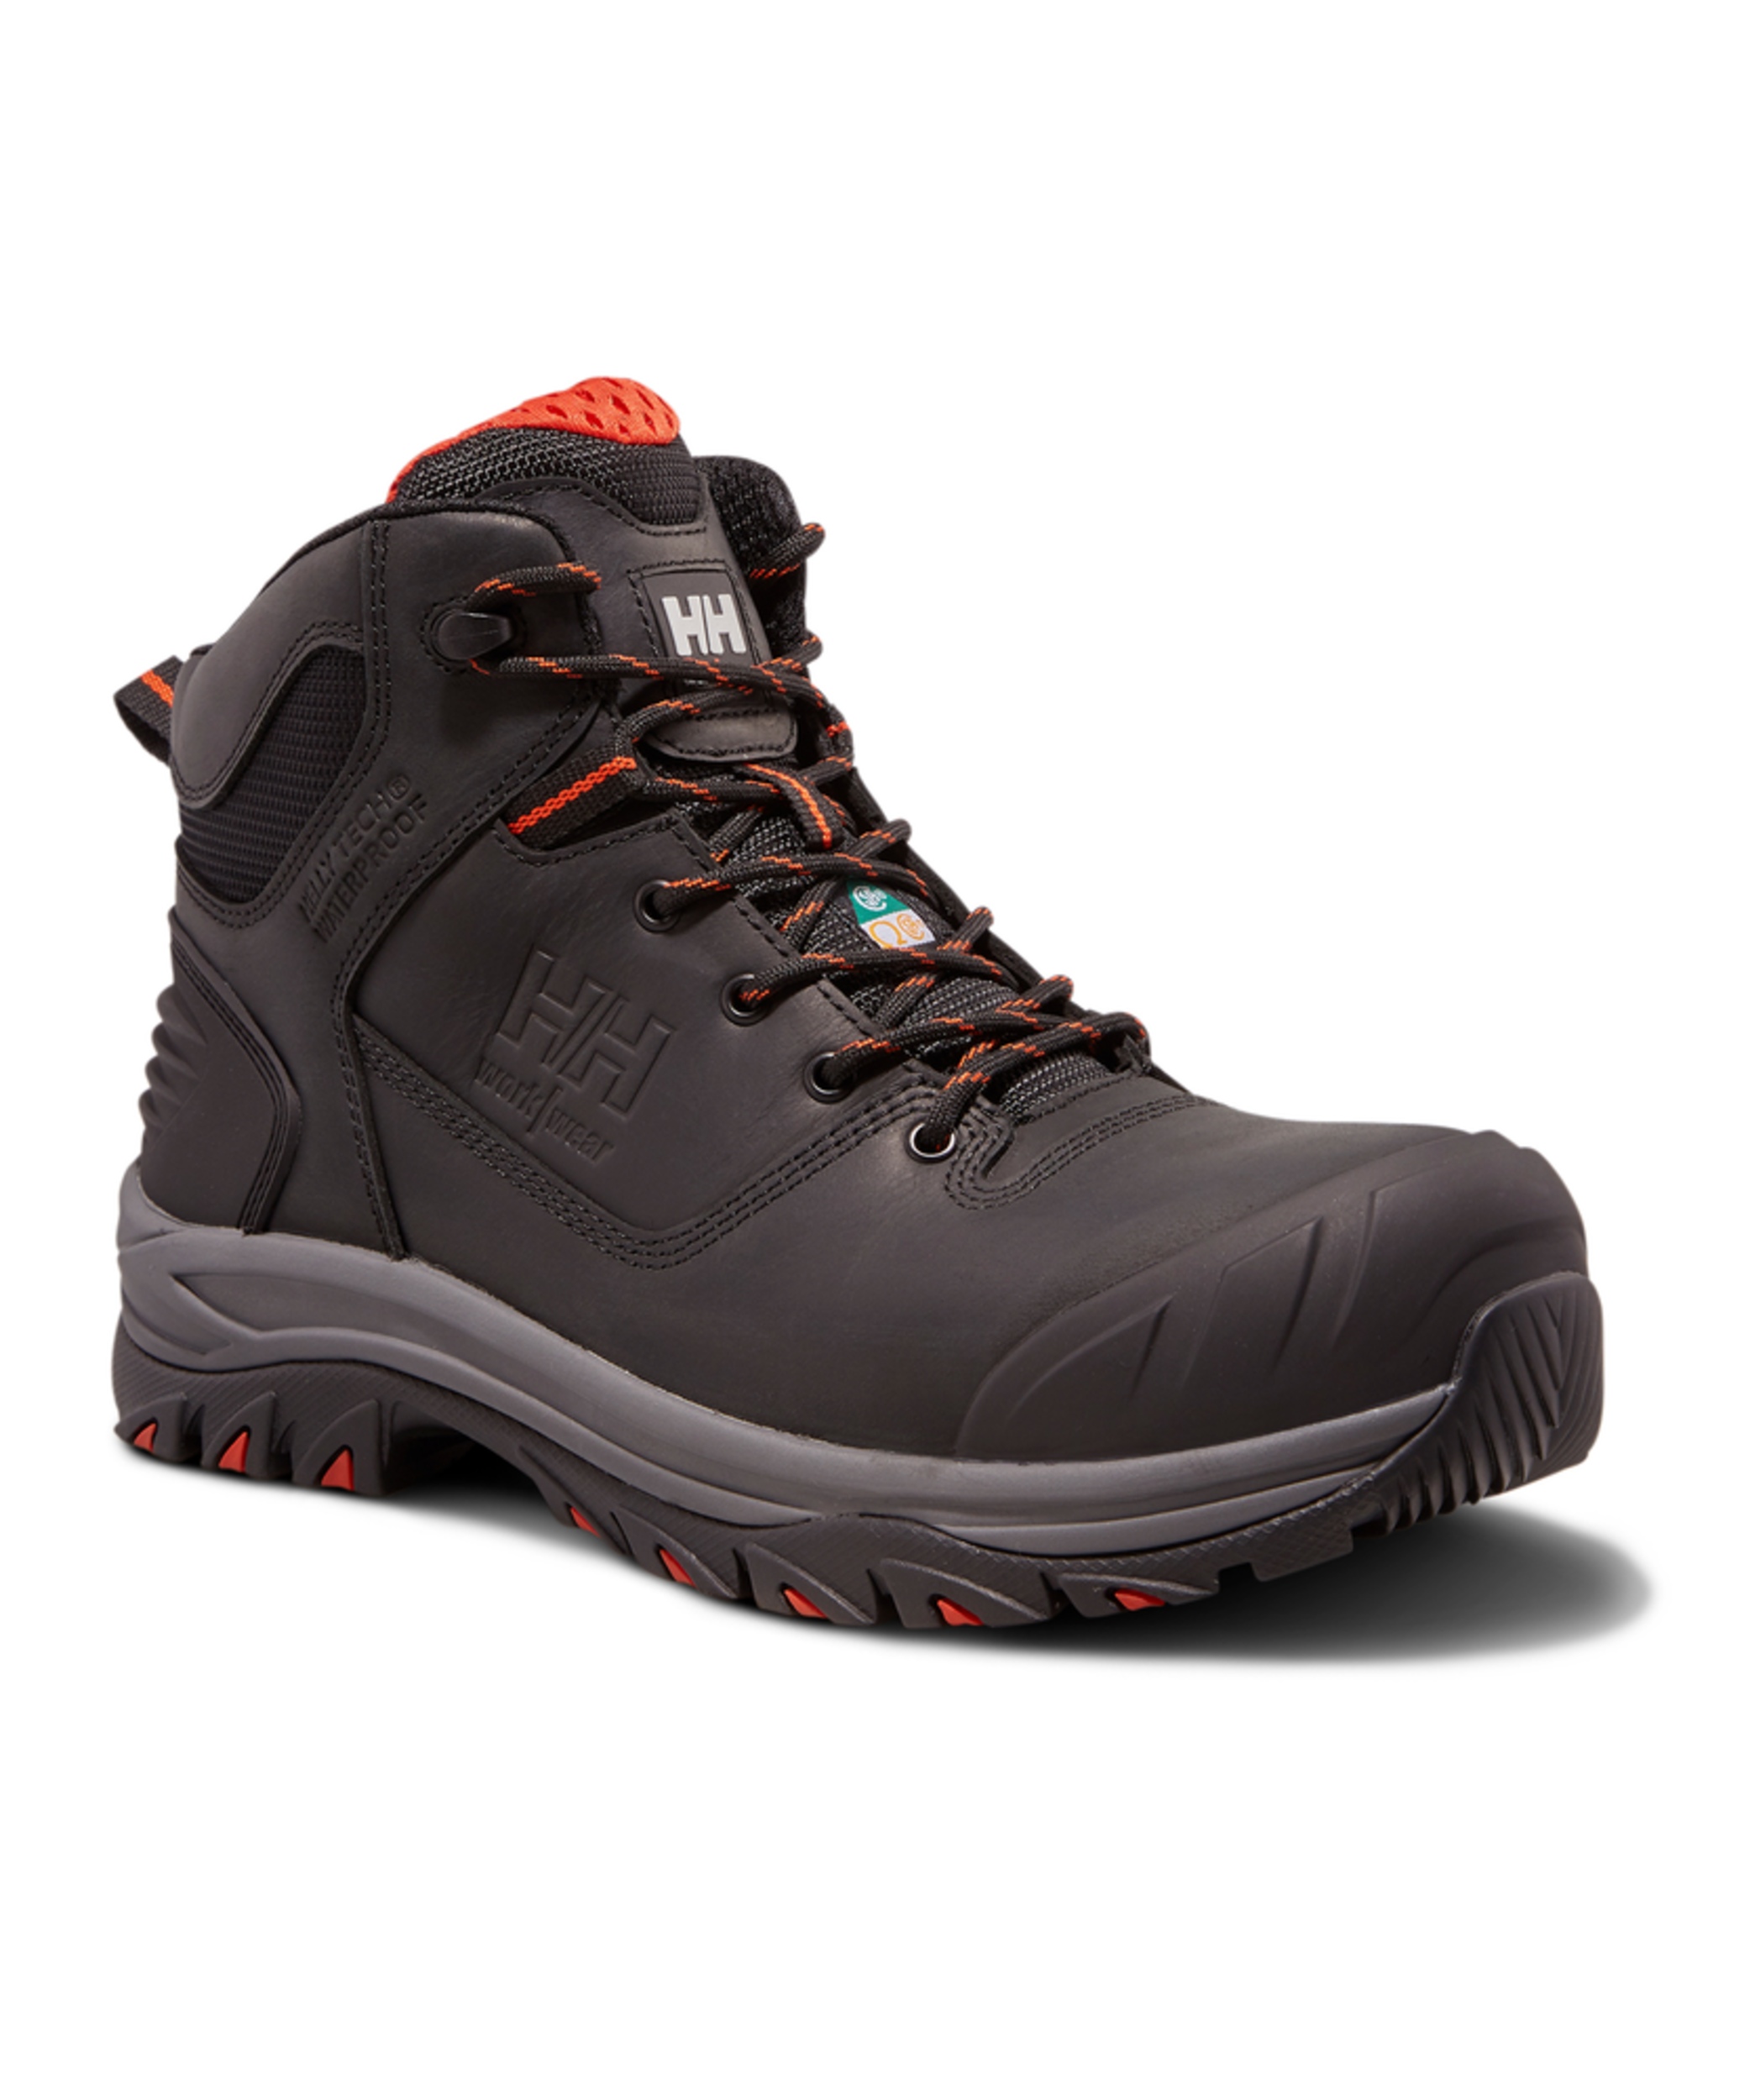 Helly Hansen Workwear Men's Composite Toe Composite Plate Helly Tech ...